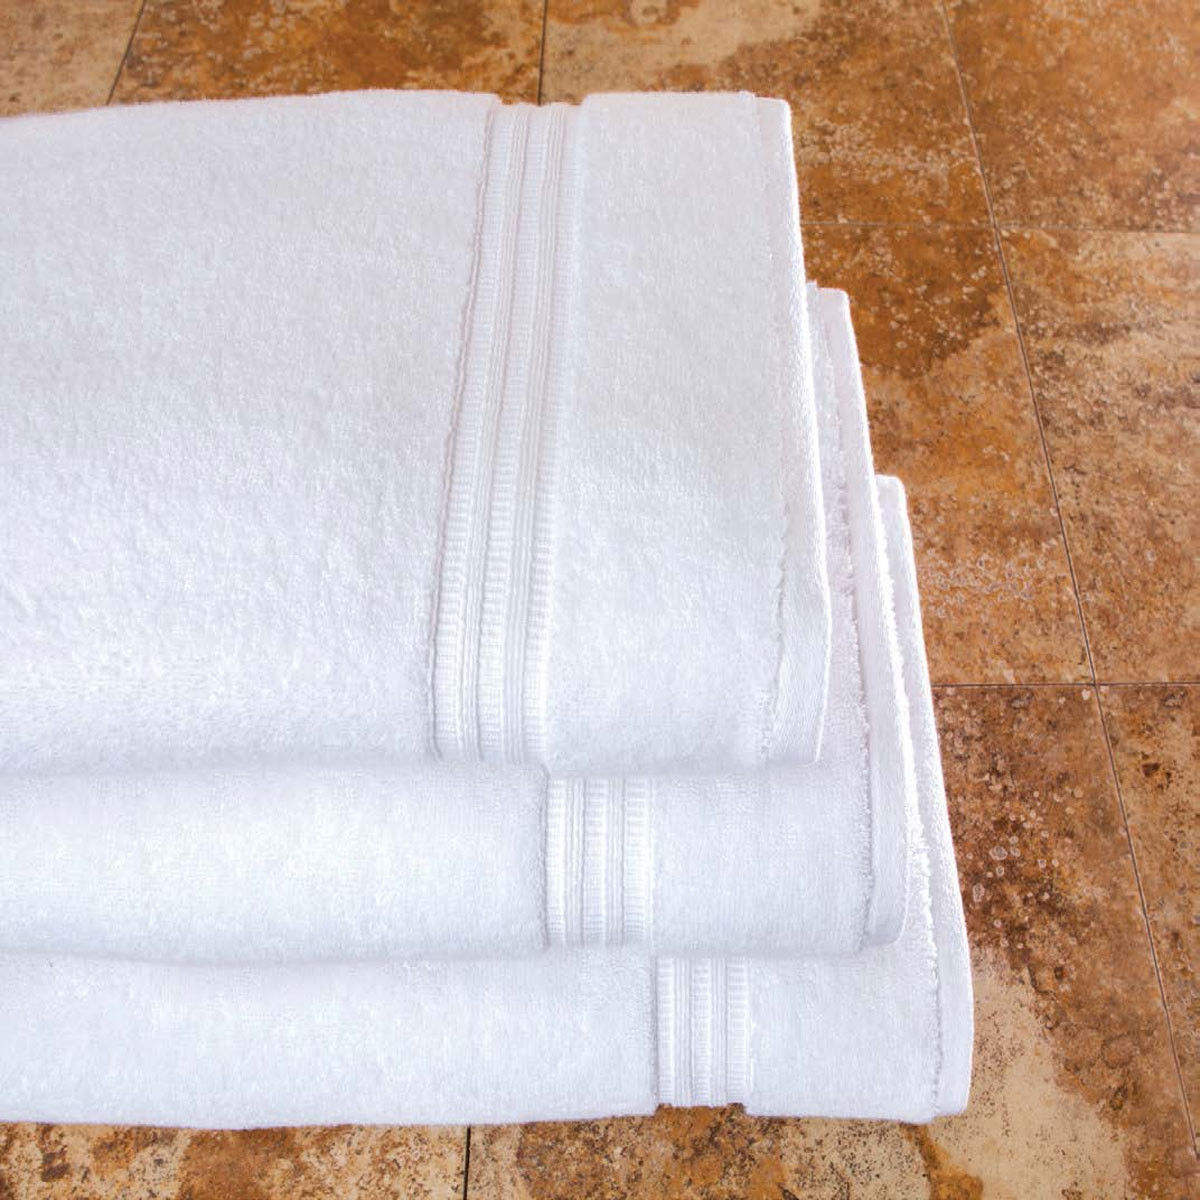 What kind of towels are used in 5 star hotels?